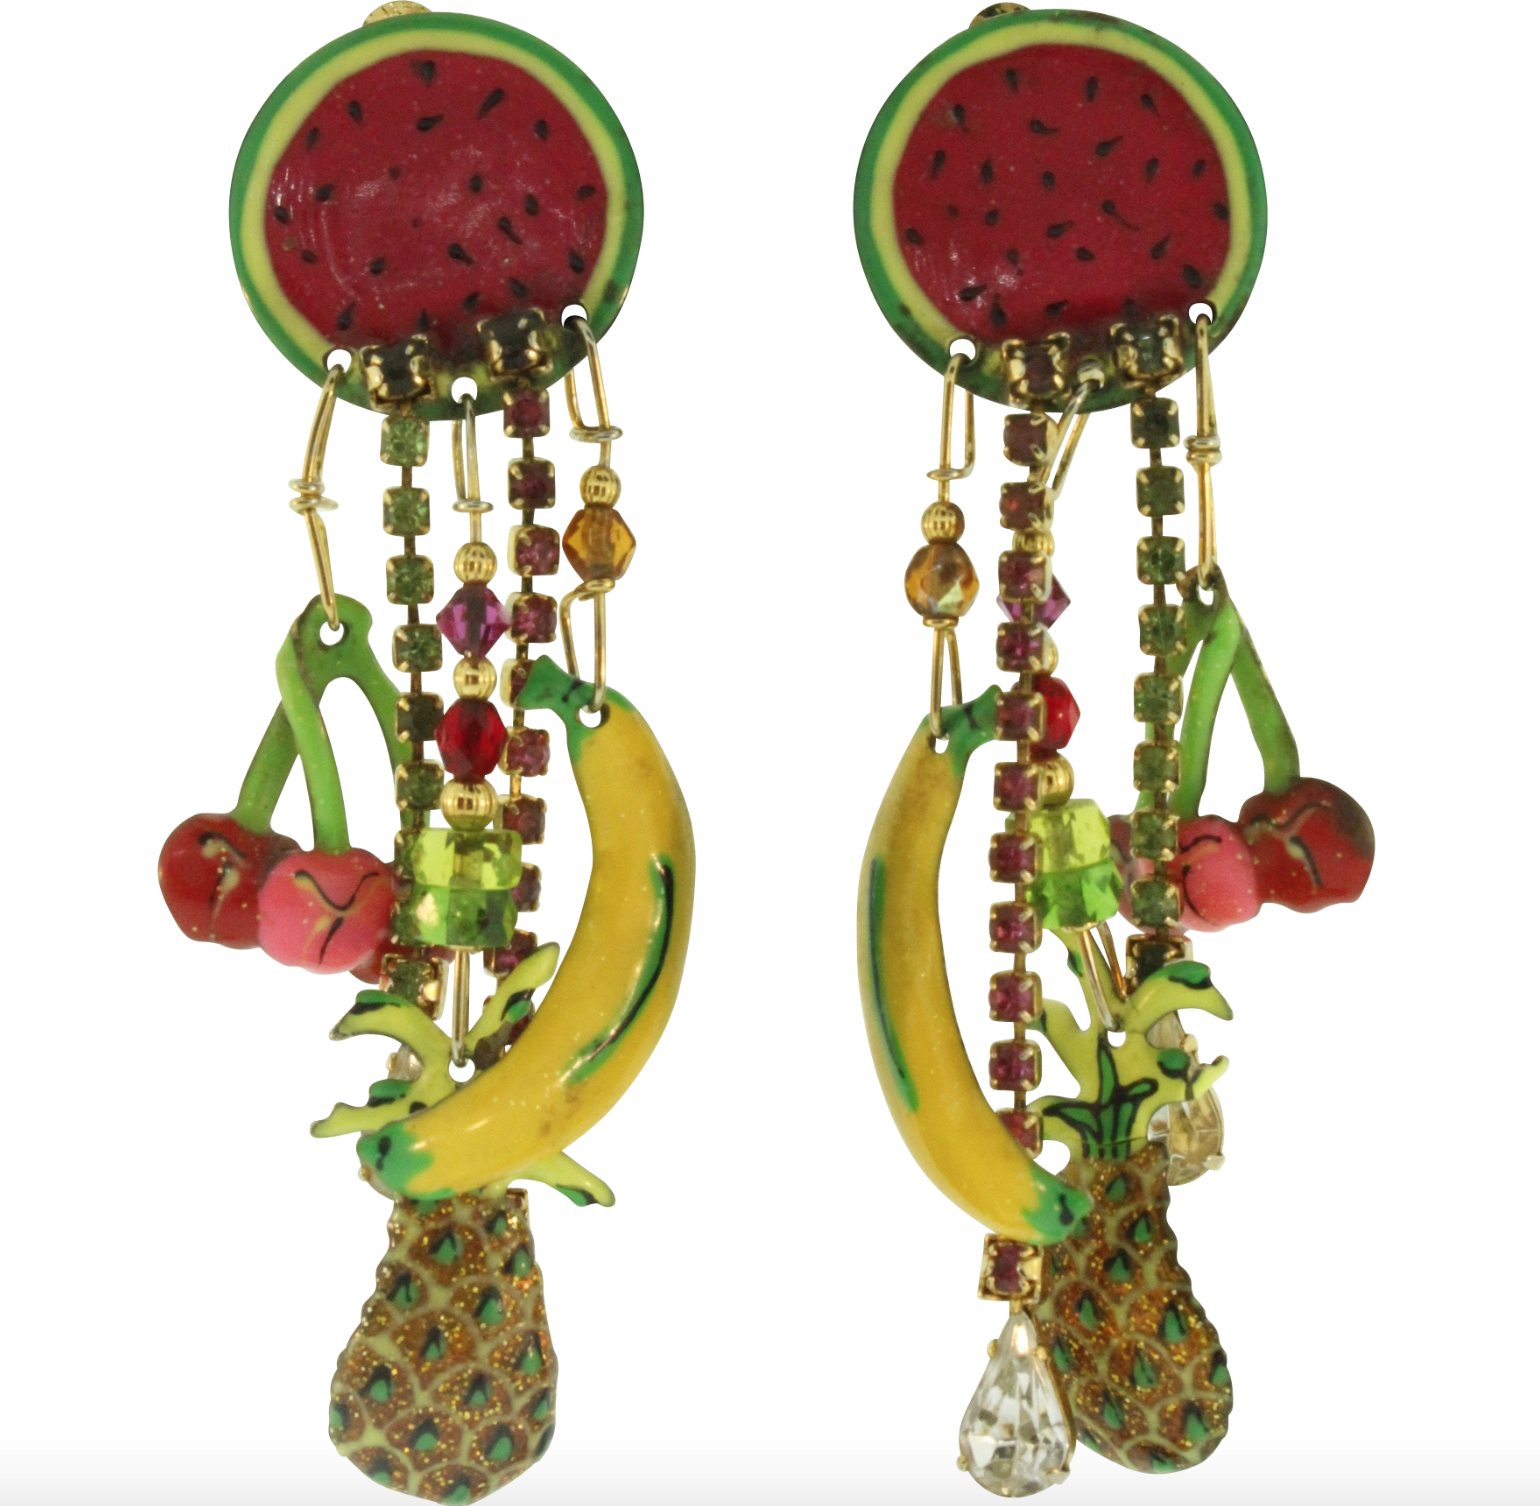 Fruit earrings will be available at Apricot Lane, St. Armands, $29. 